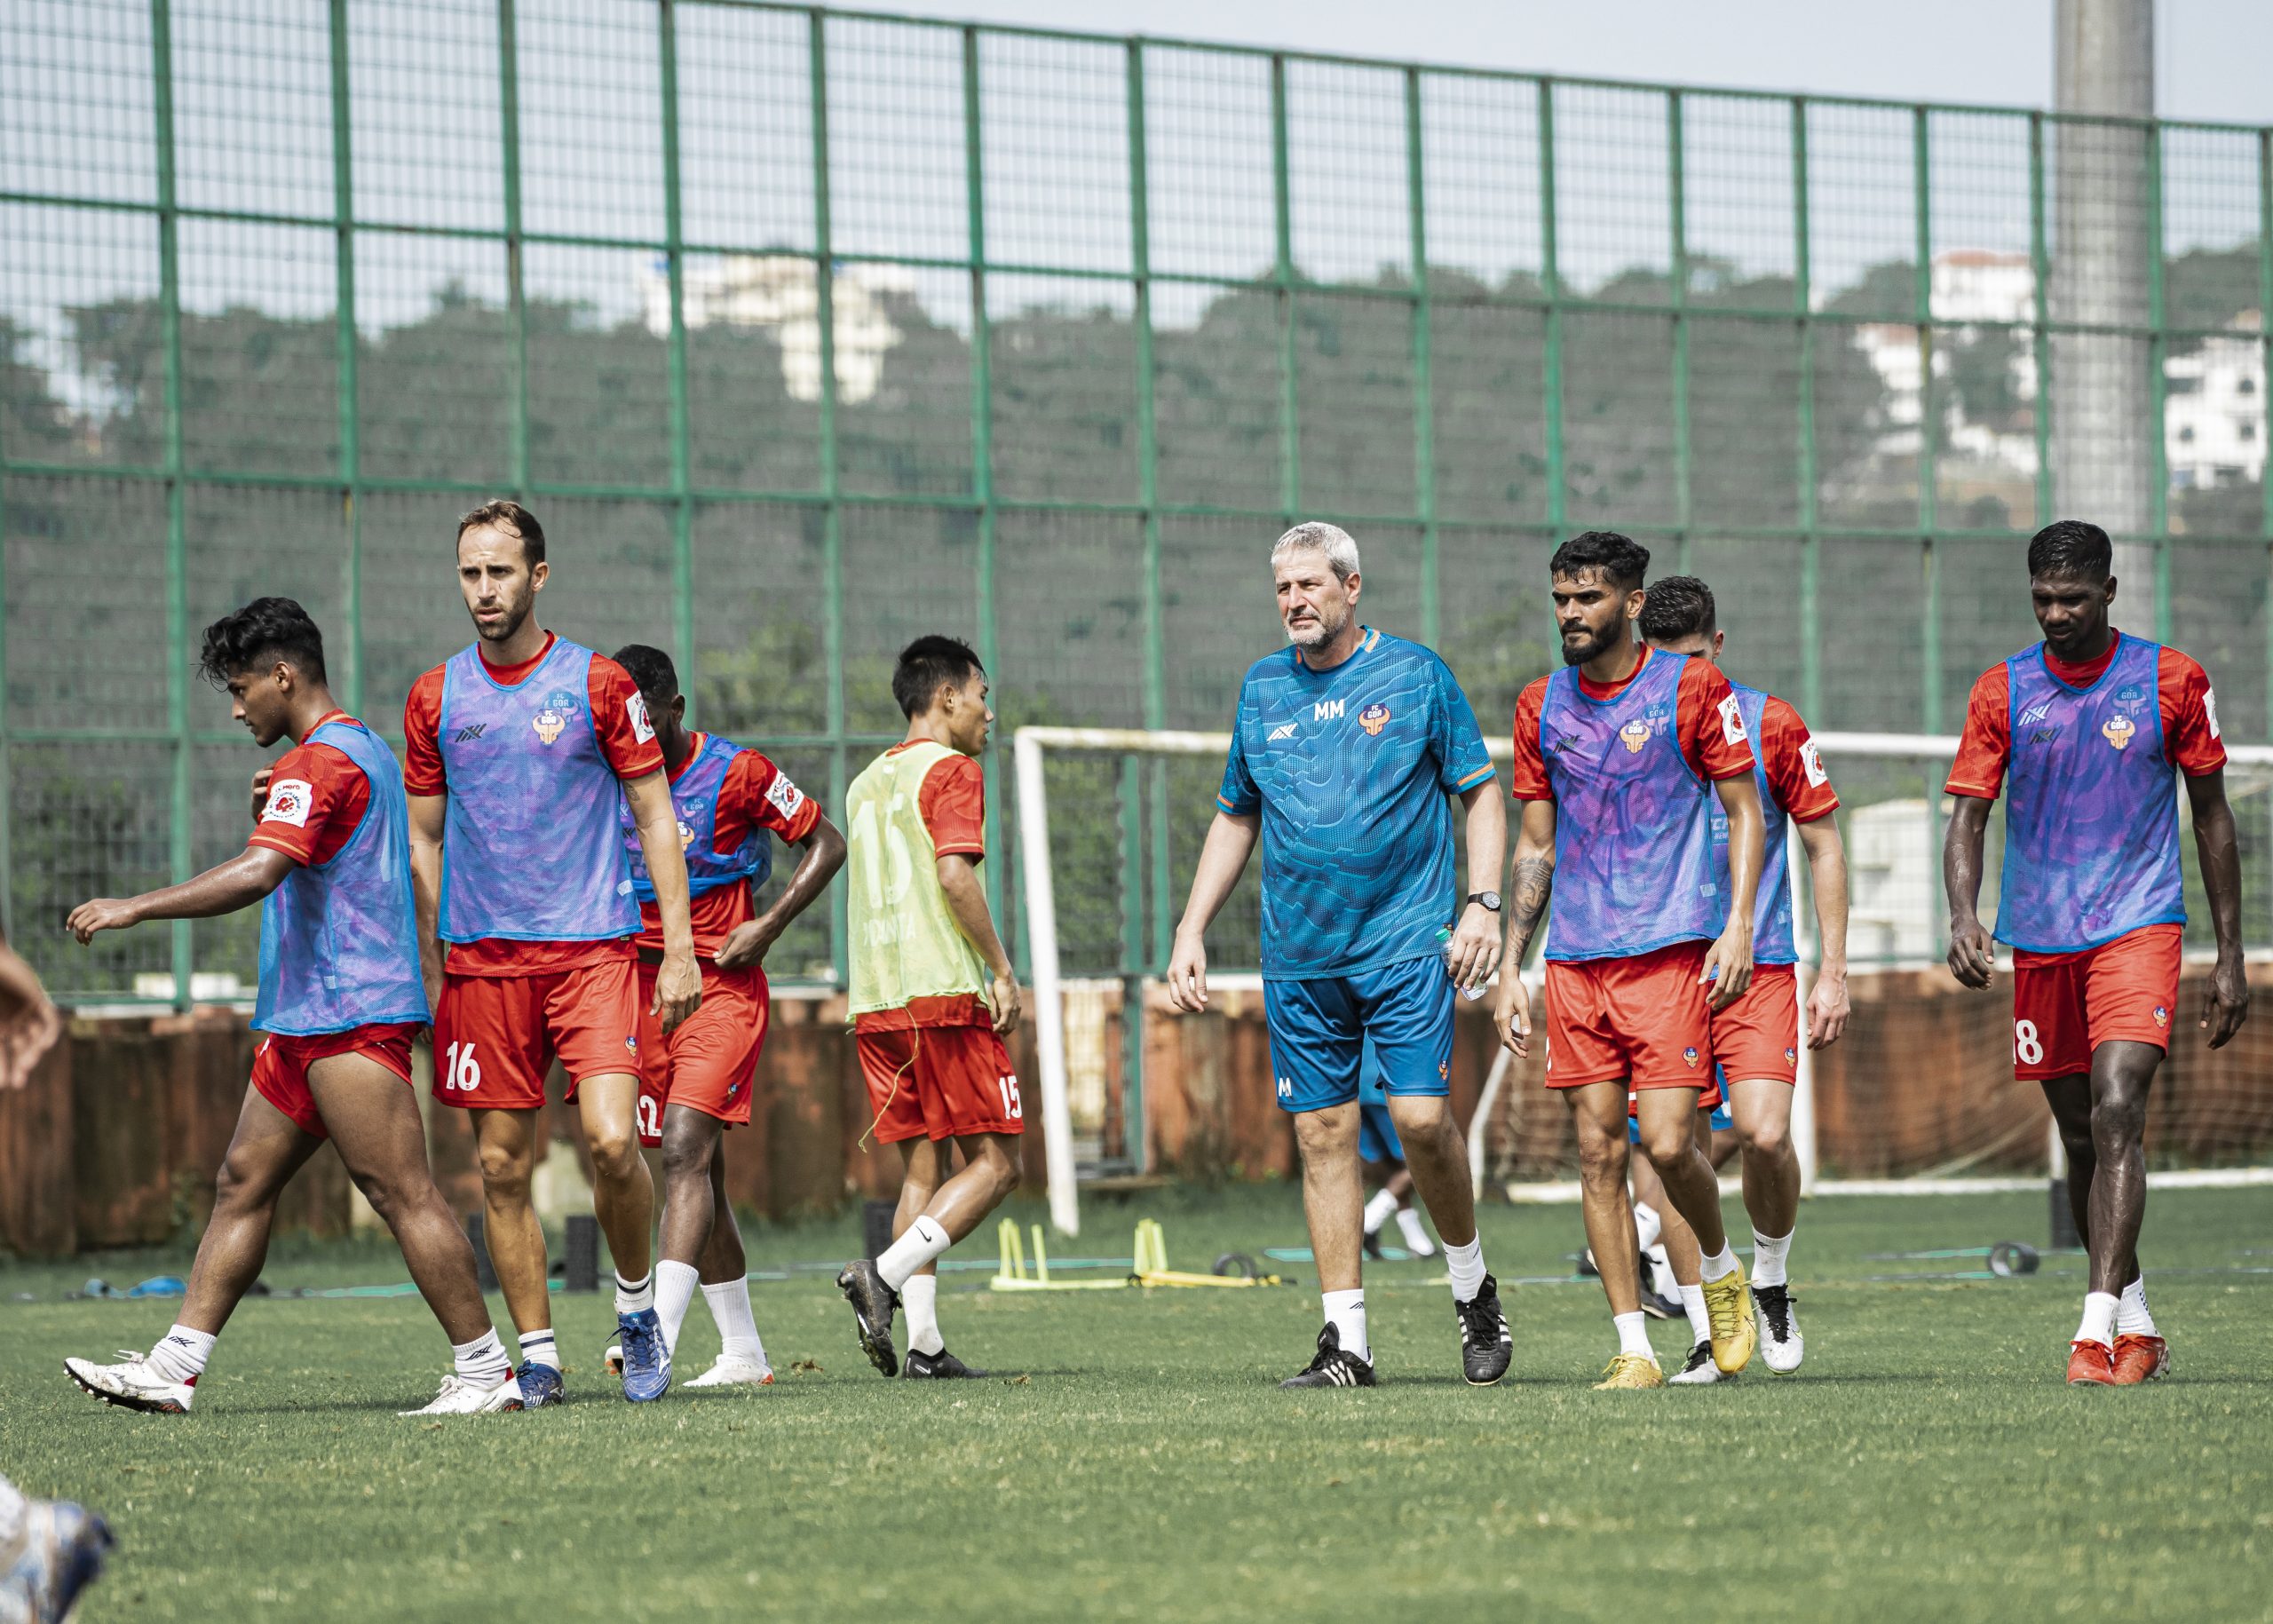 FC Goa players in training under the eagle eyes of coach Manolo Marquez (in blue in the middle) ahead of their first 132nd IndianOil Durand Cup game in Guwahati